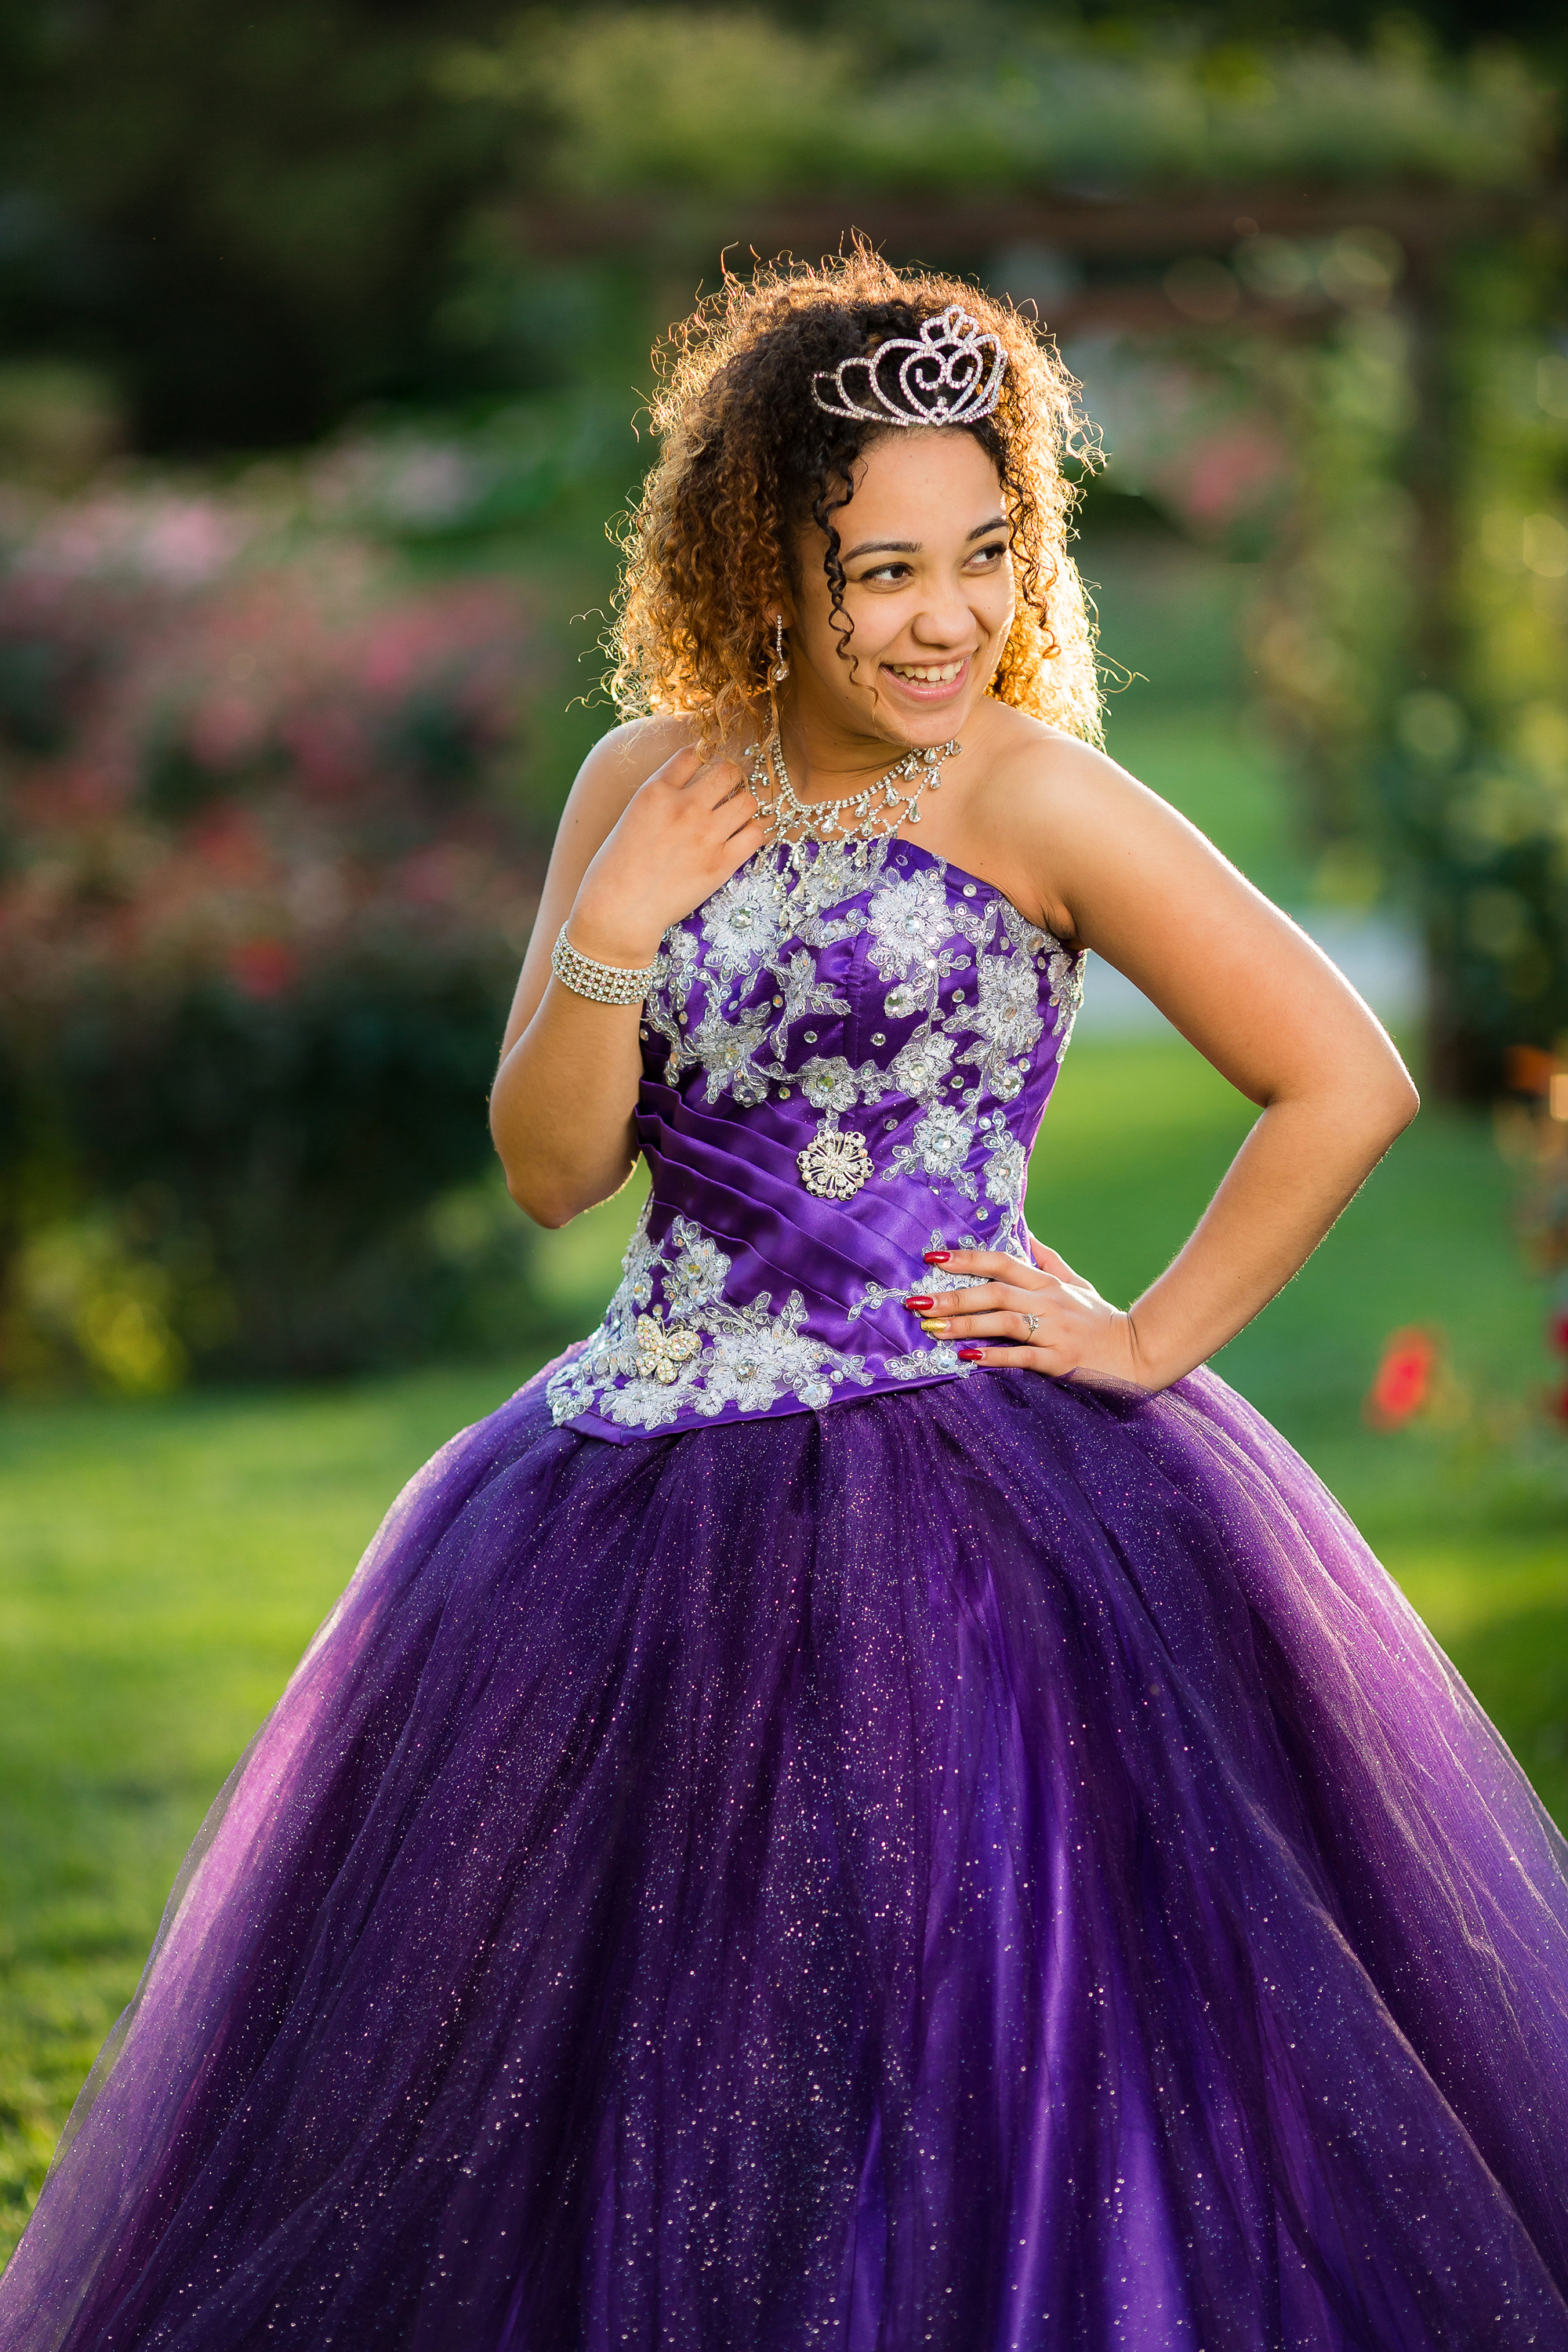 Natalias-Quince-Session-Garcia-Photography-2195-2.jpg